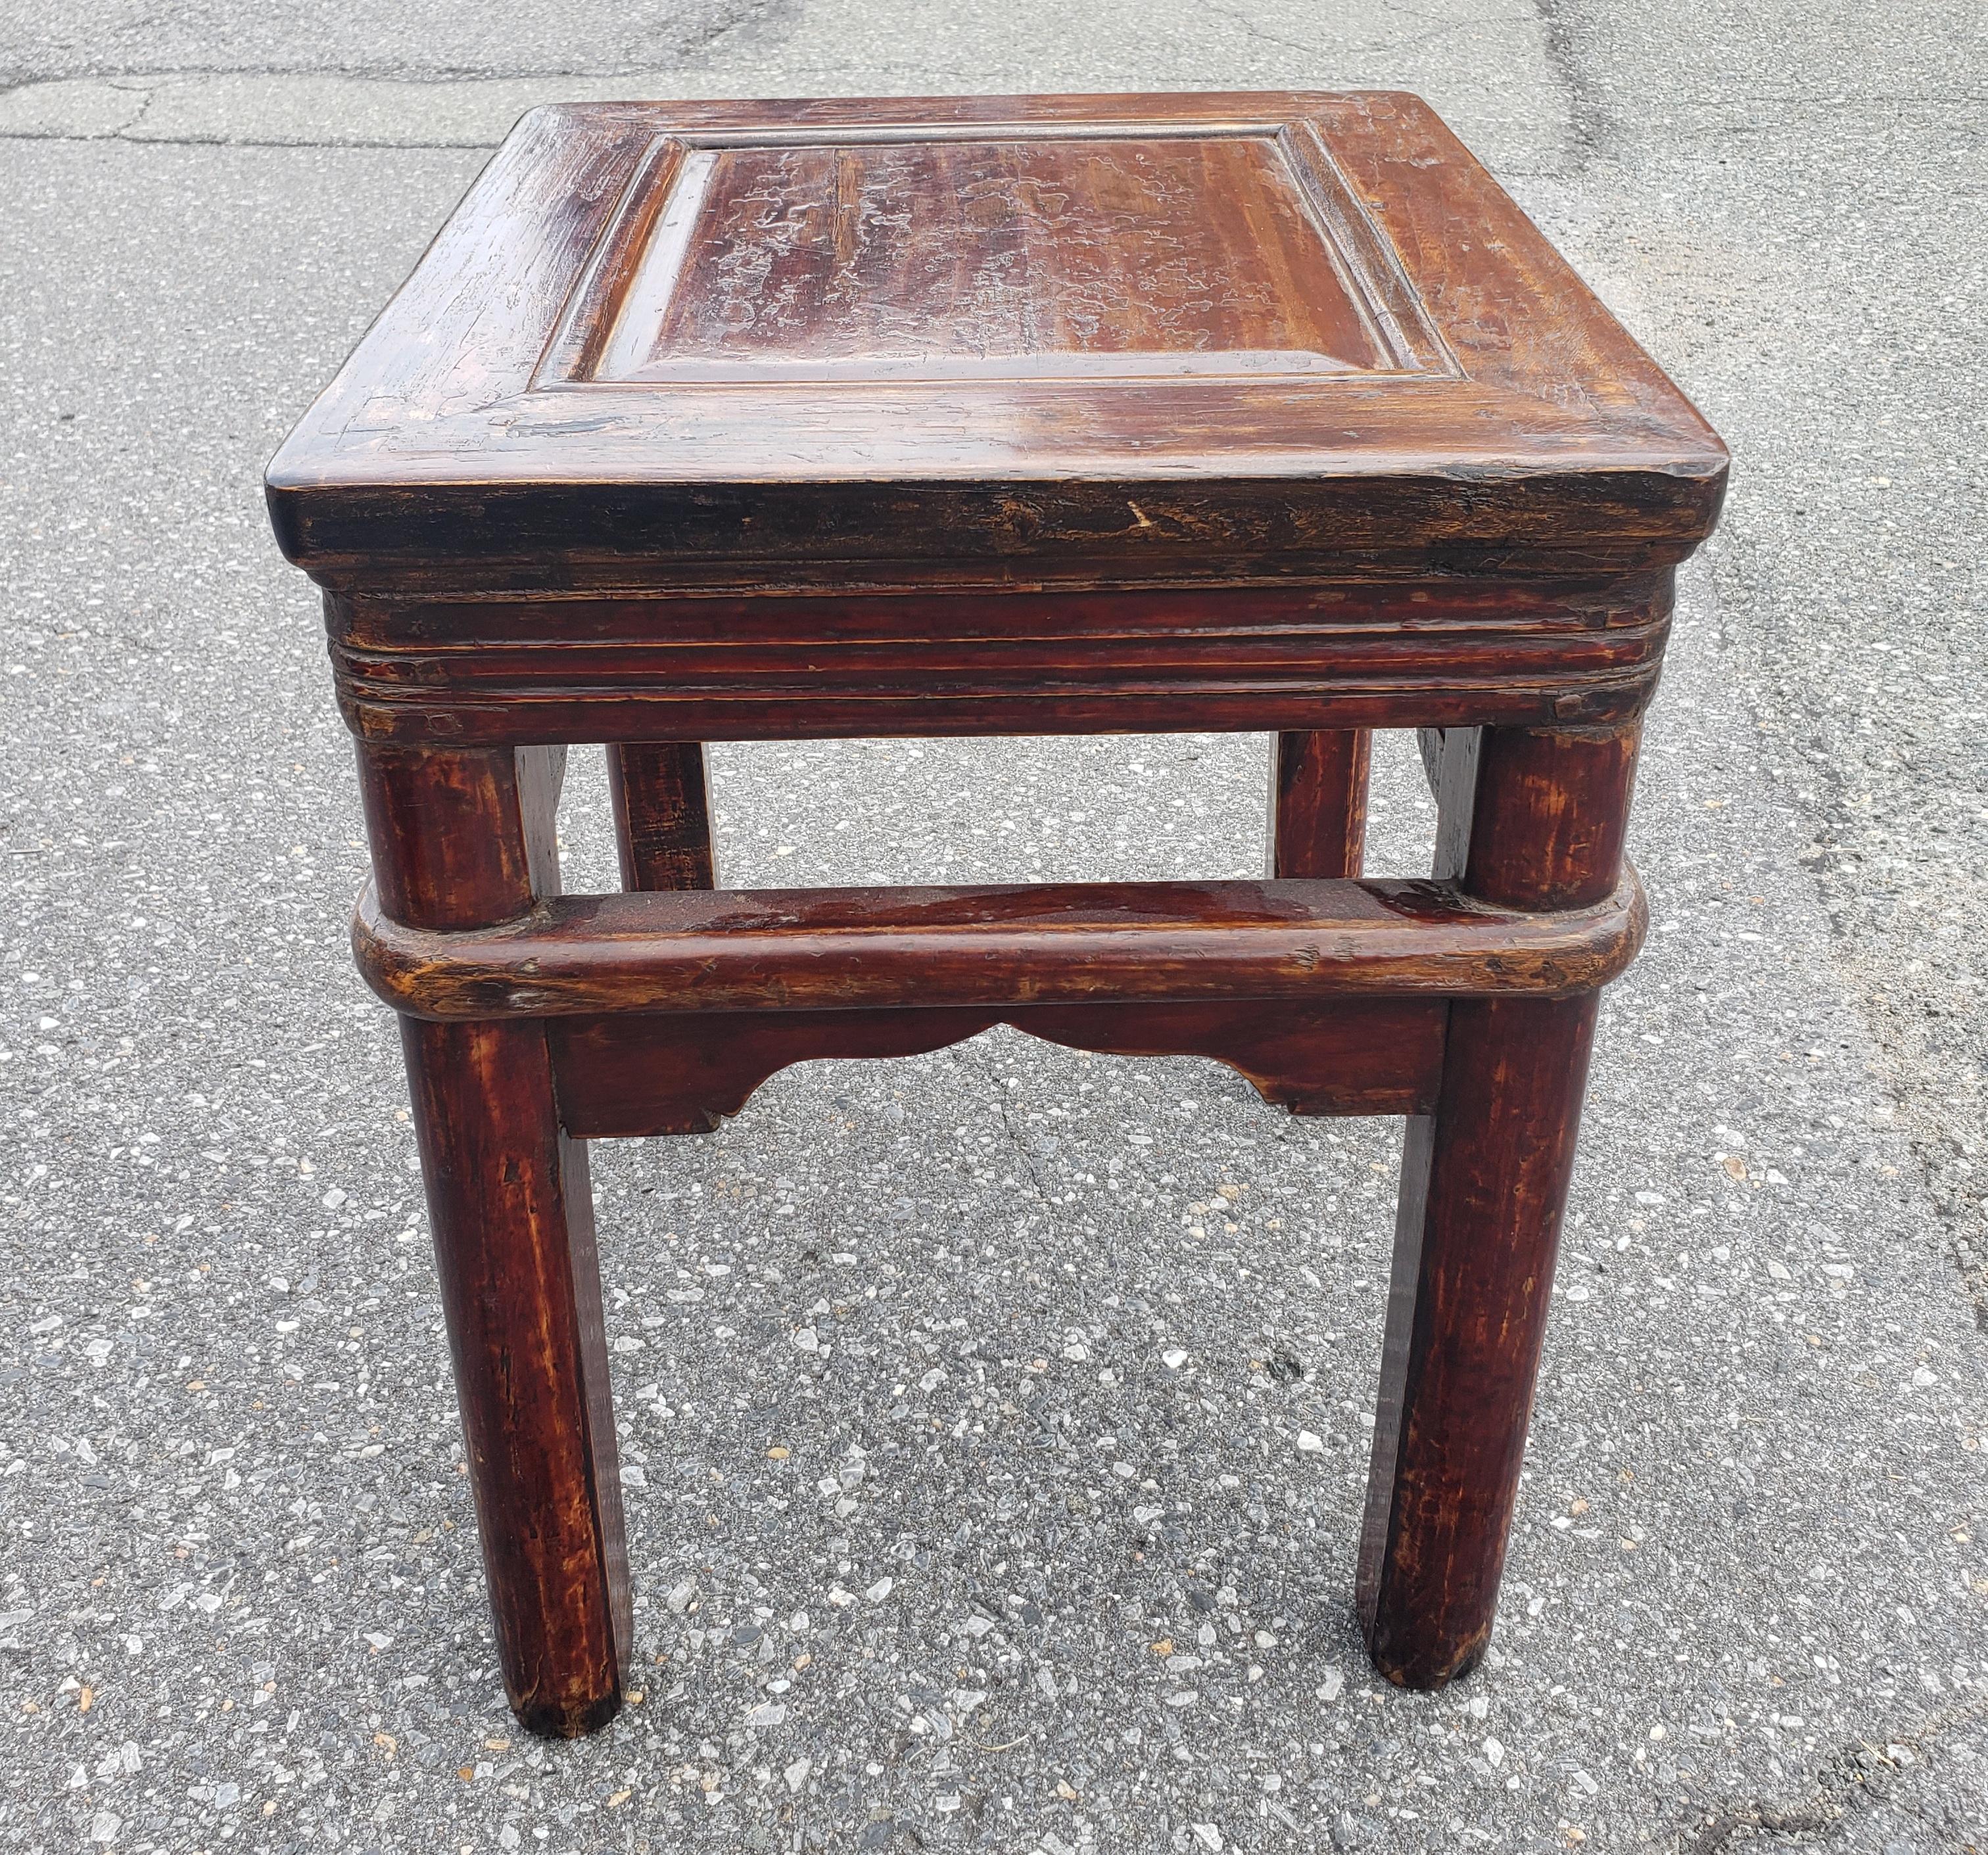 Late 19th Century Chinese Stained Elmwood Low Stand or Side Table. Very sturdy. Measures 15.5